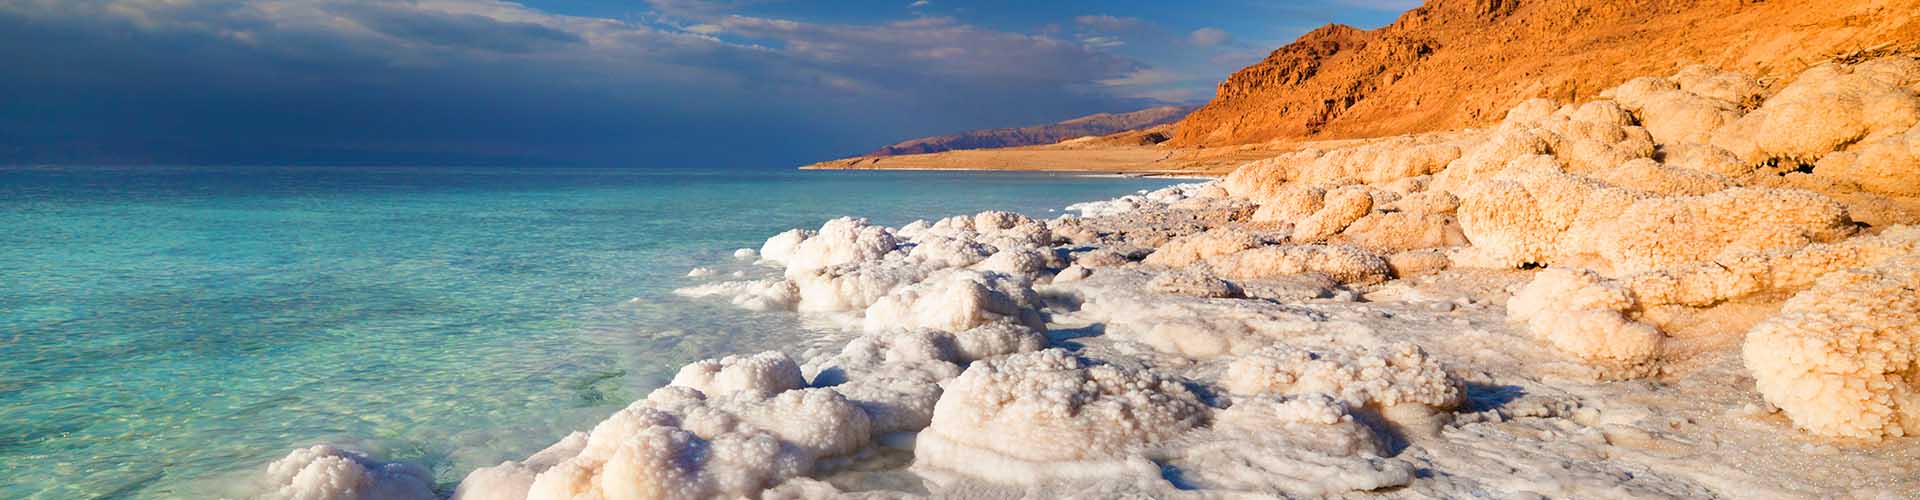 From the Dead Sea to Aqaba